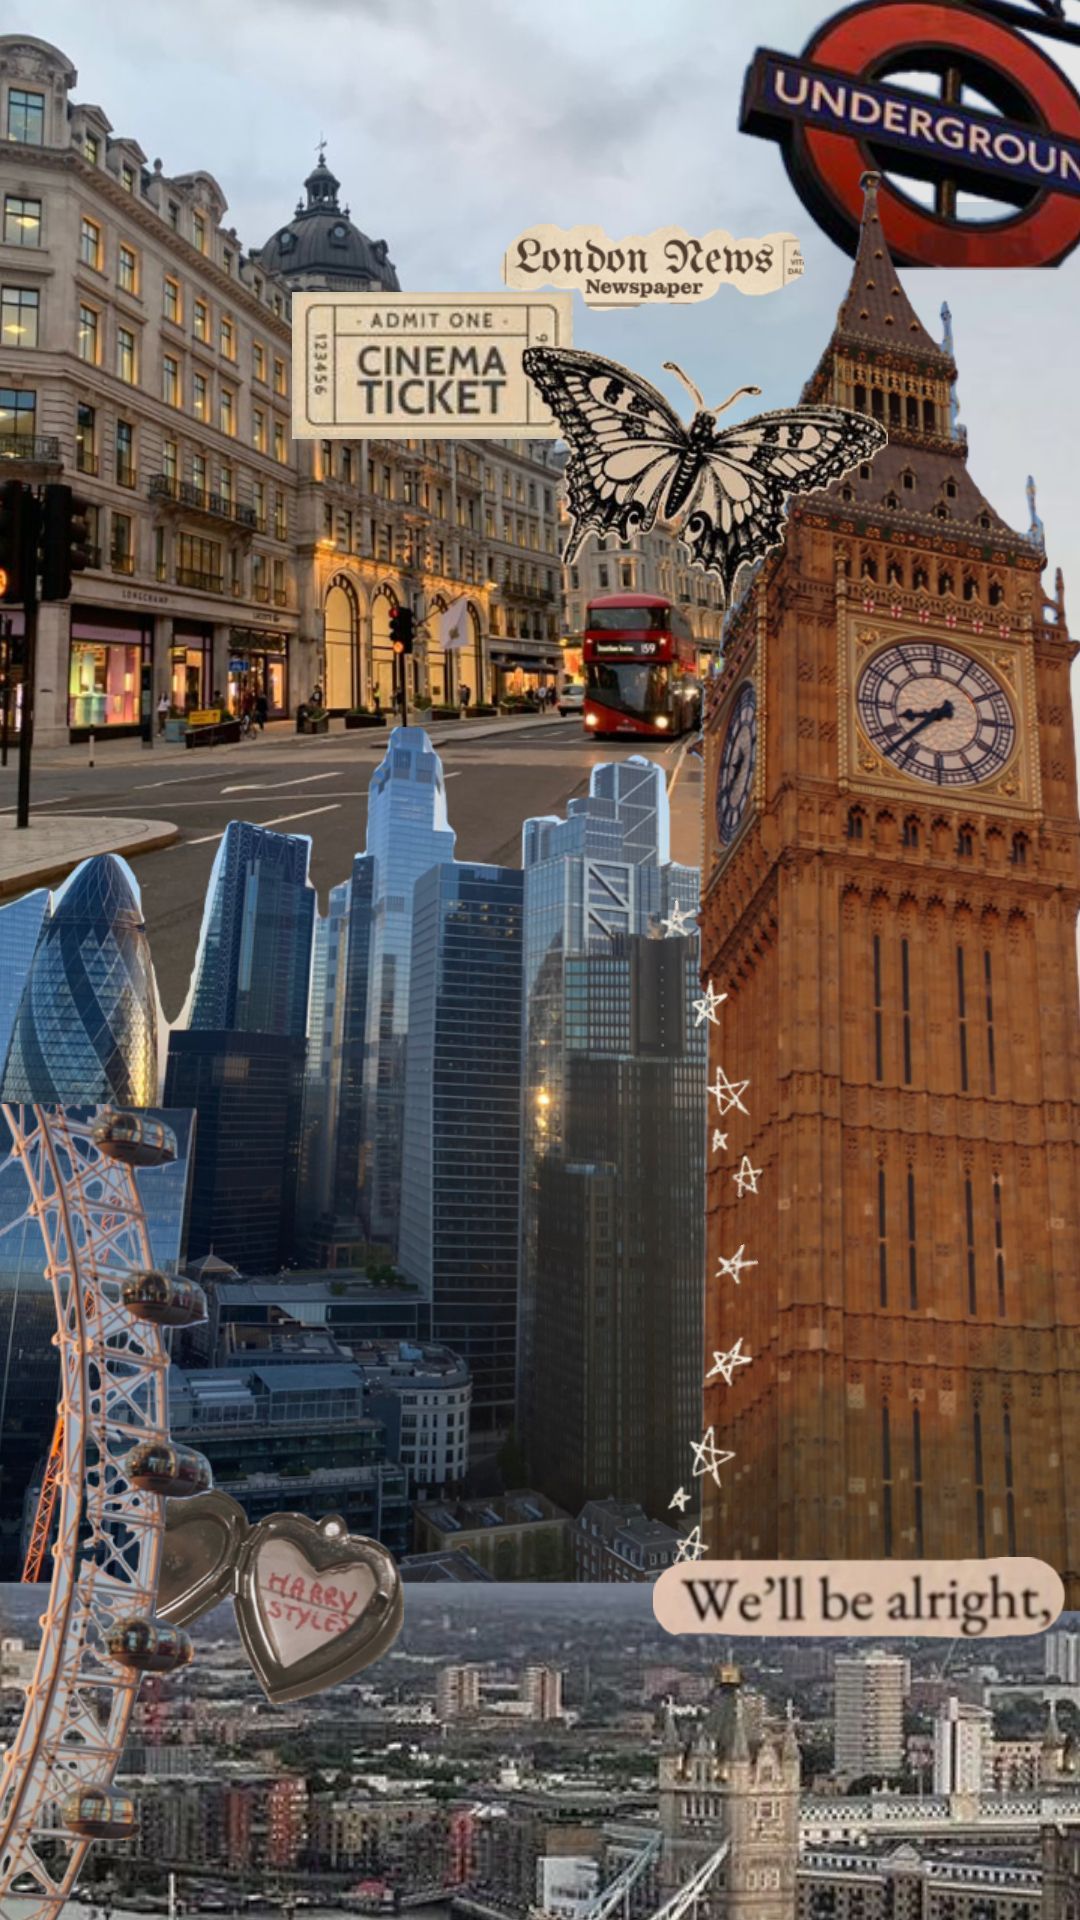 A collage of London sights including the clock tower, the underground sign and the city skyline - London